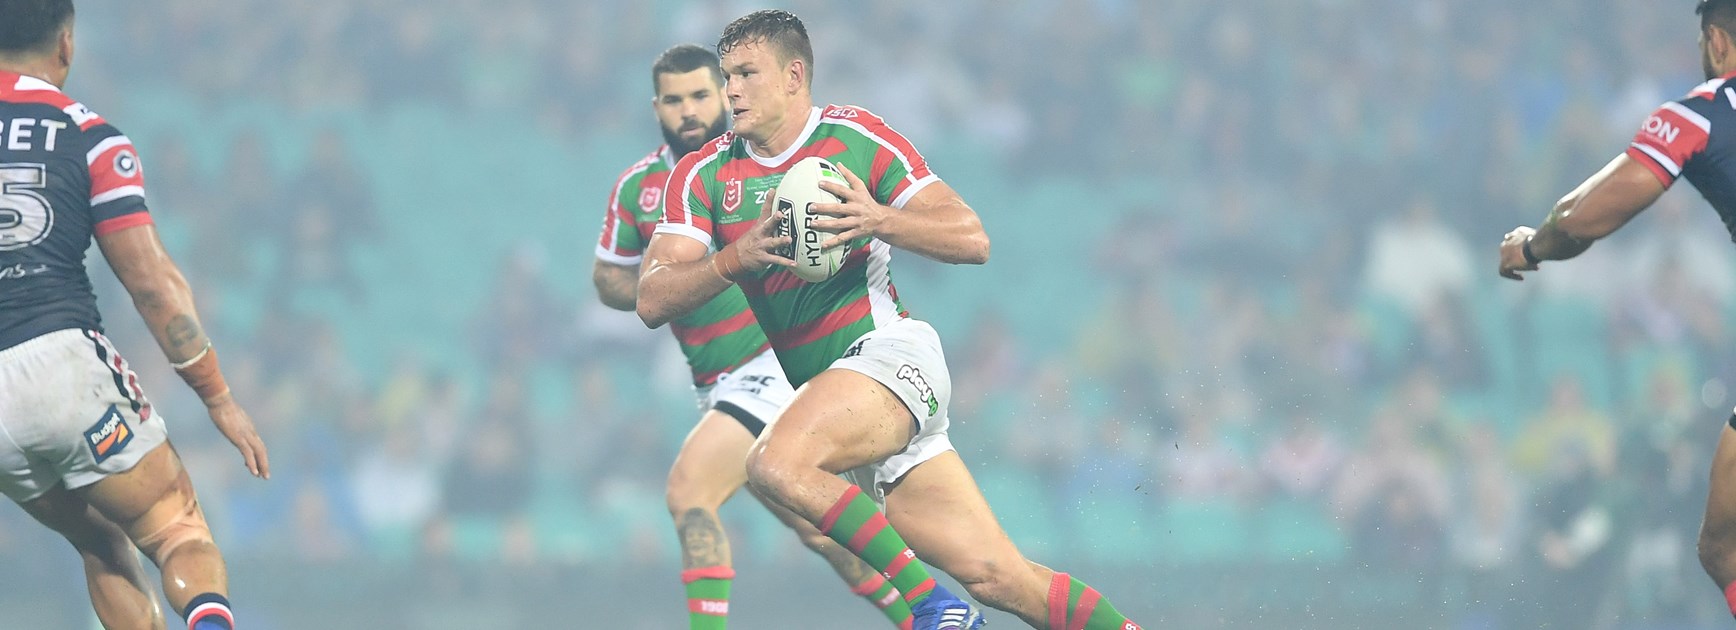 The phone call that lured Knight to Rabbitohs